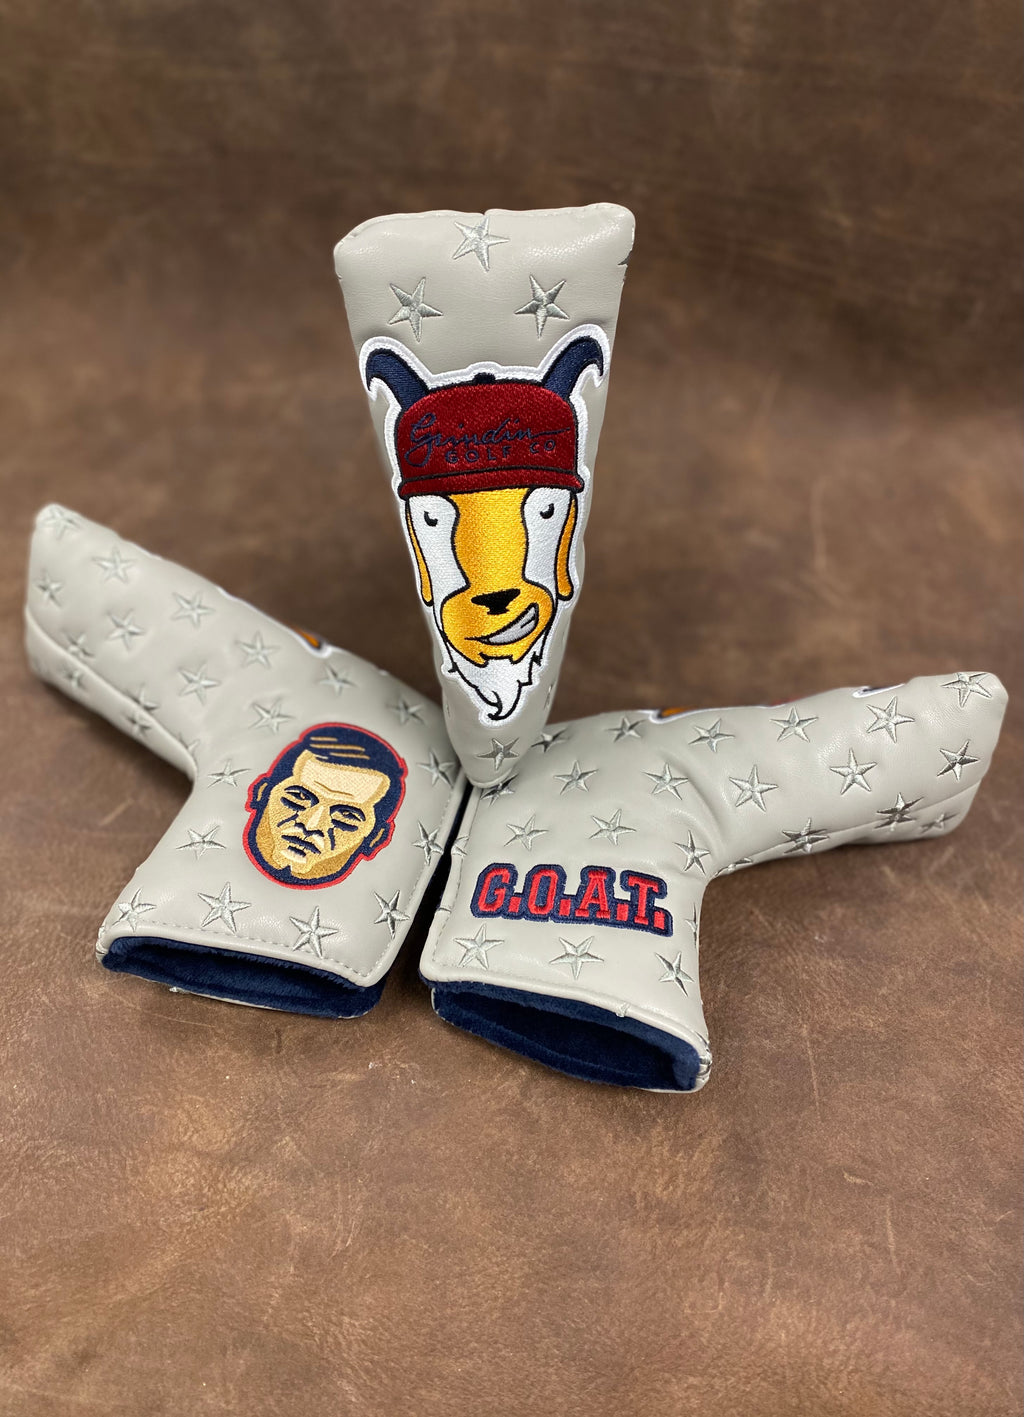 “THE GOAT” Blade Putter Cover